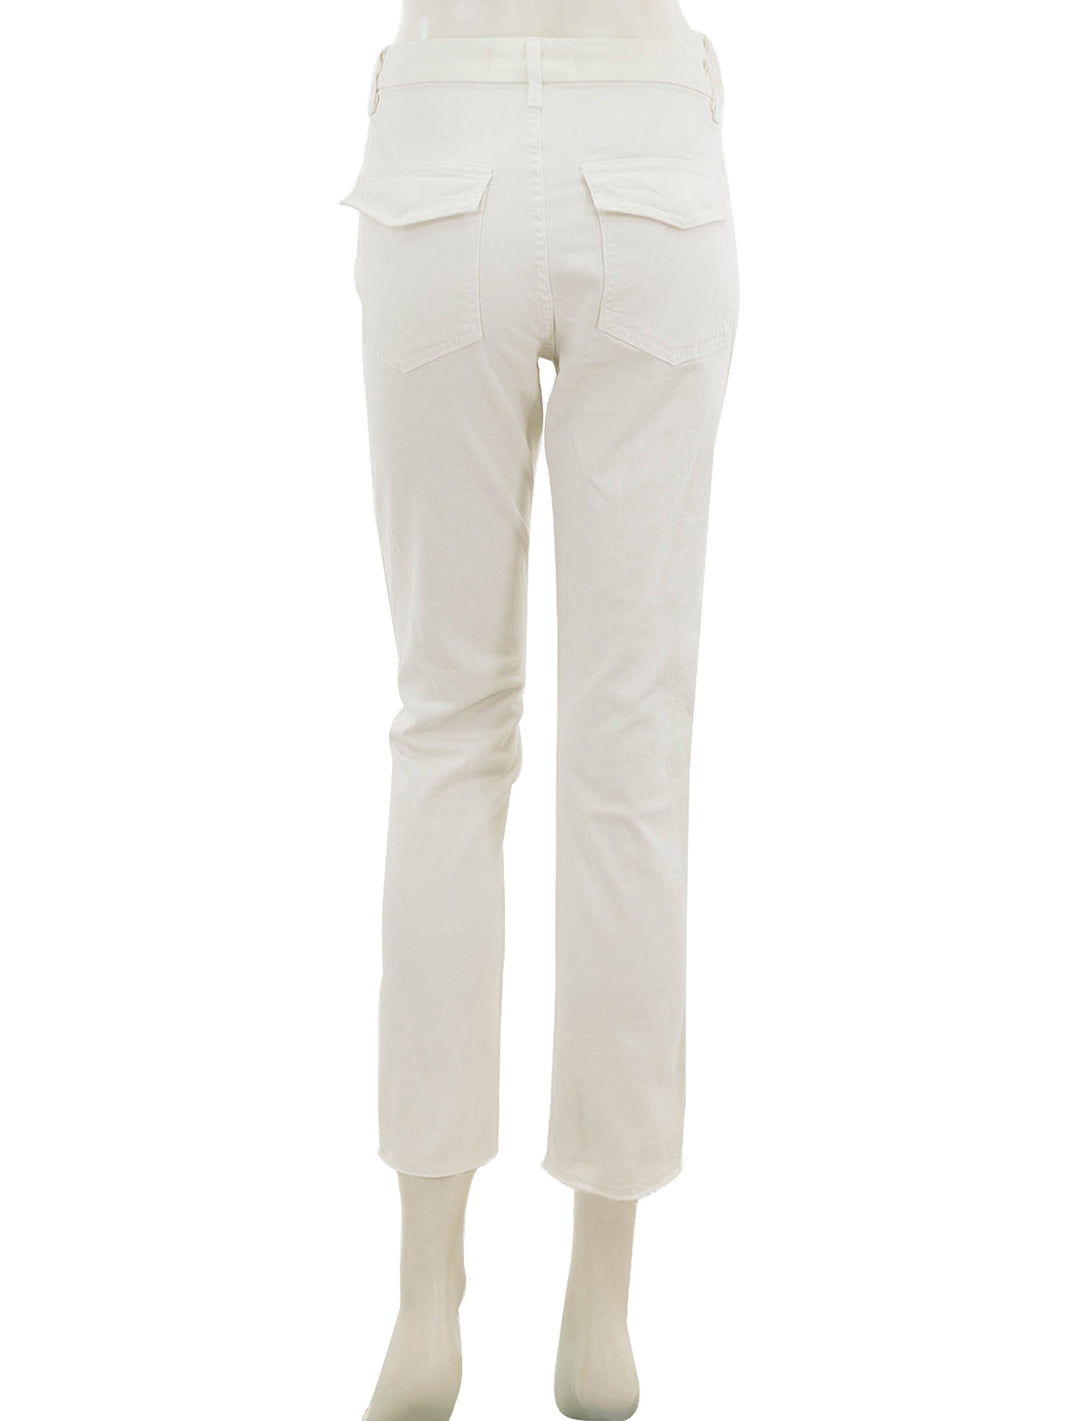 Back view of AMO's easy army trouser in white oak.